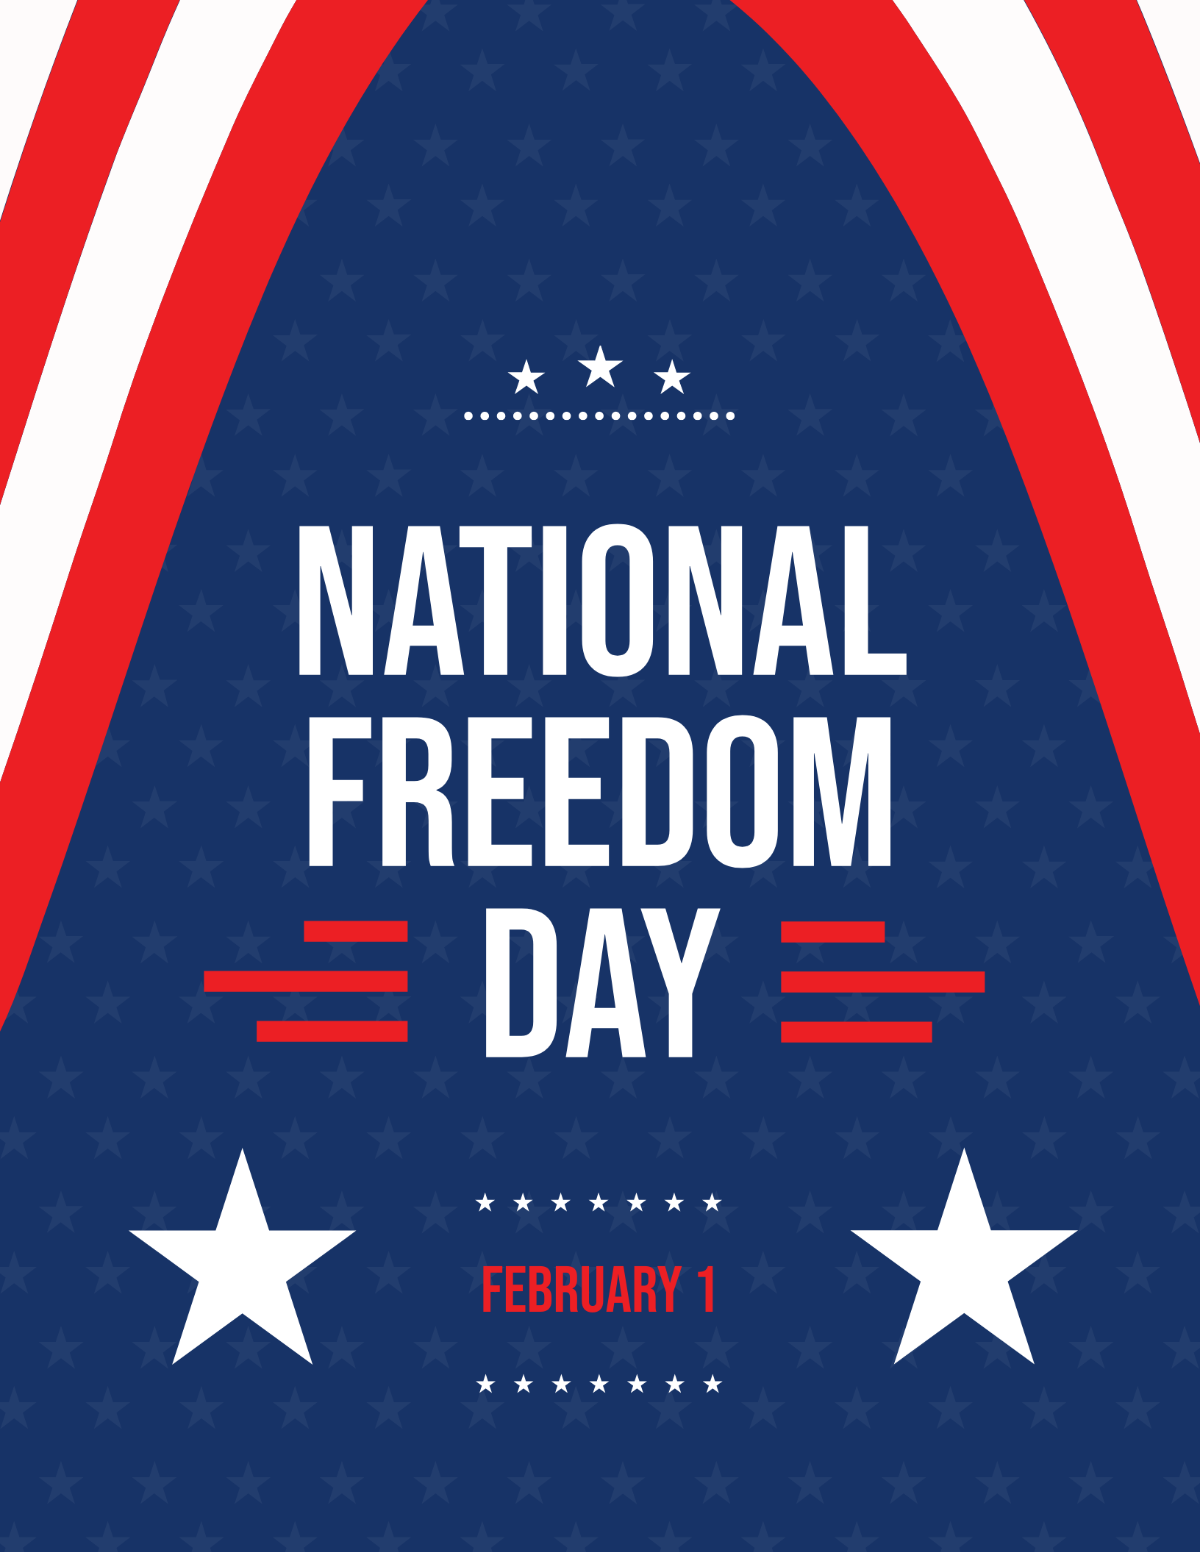 National Freedom Day Flyer Template